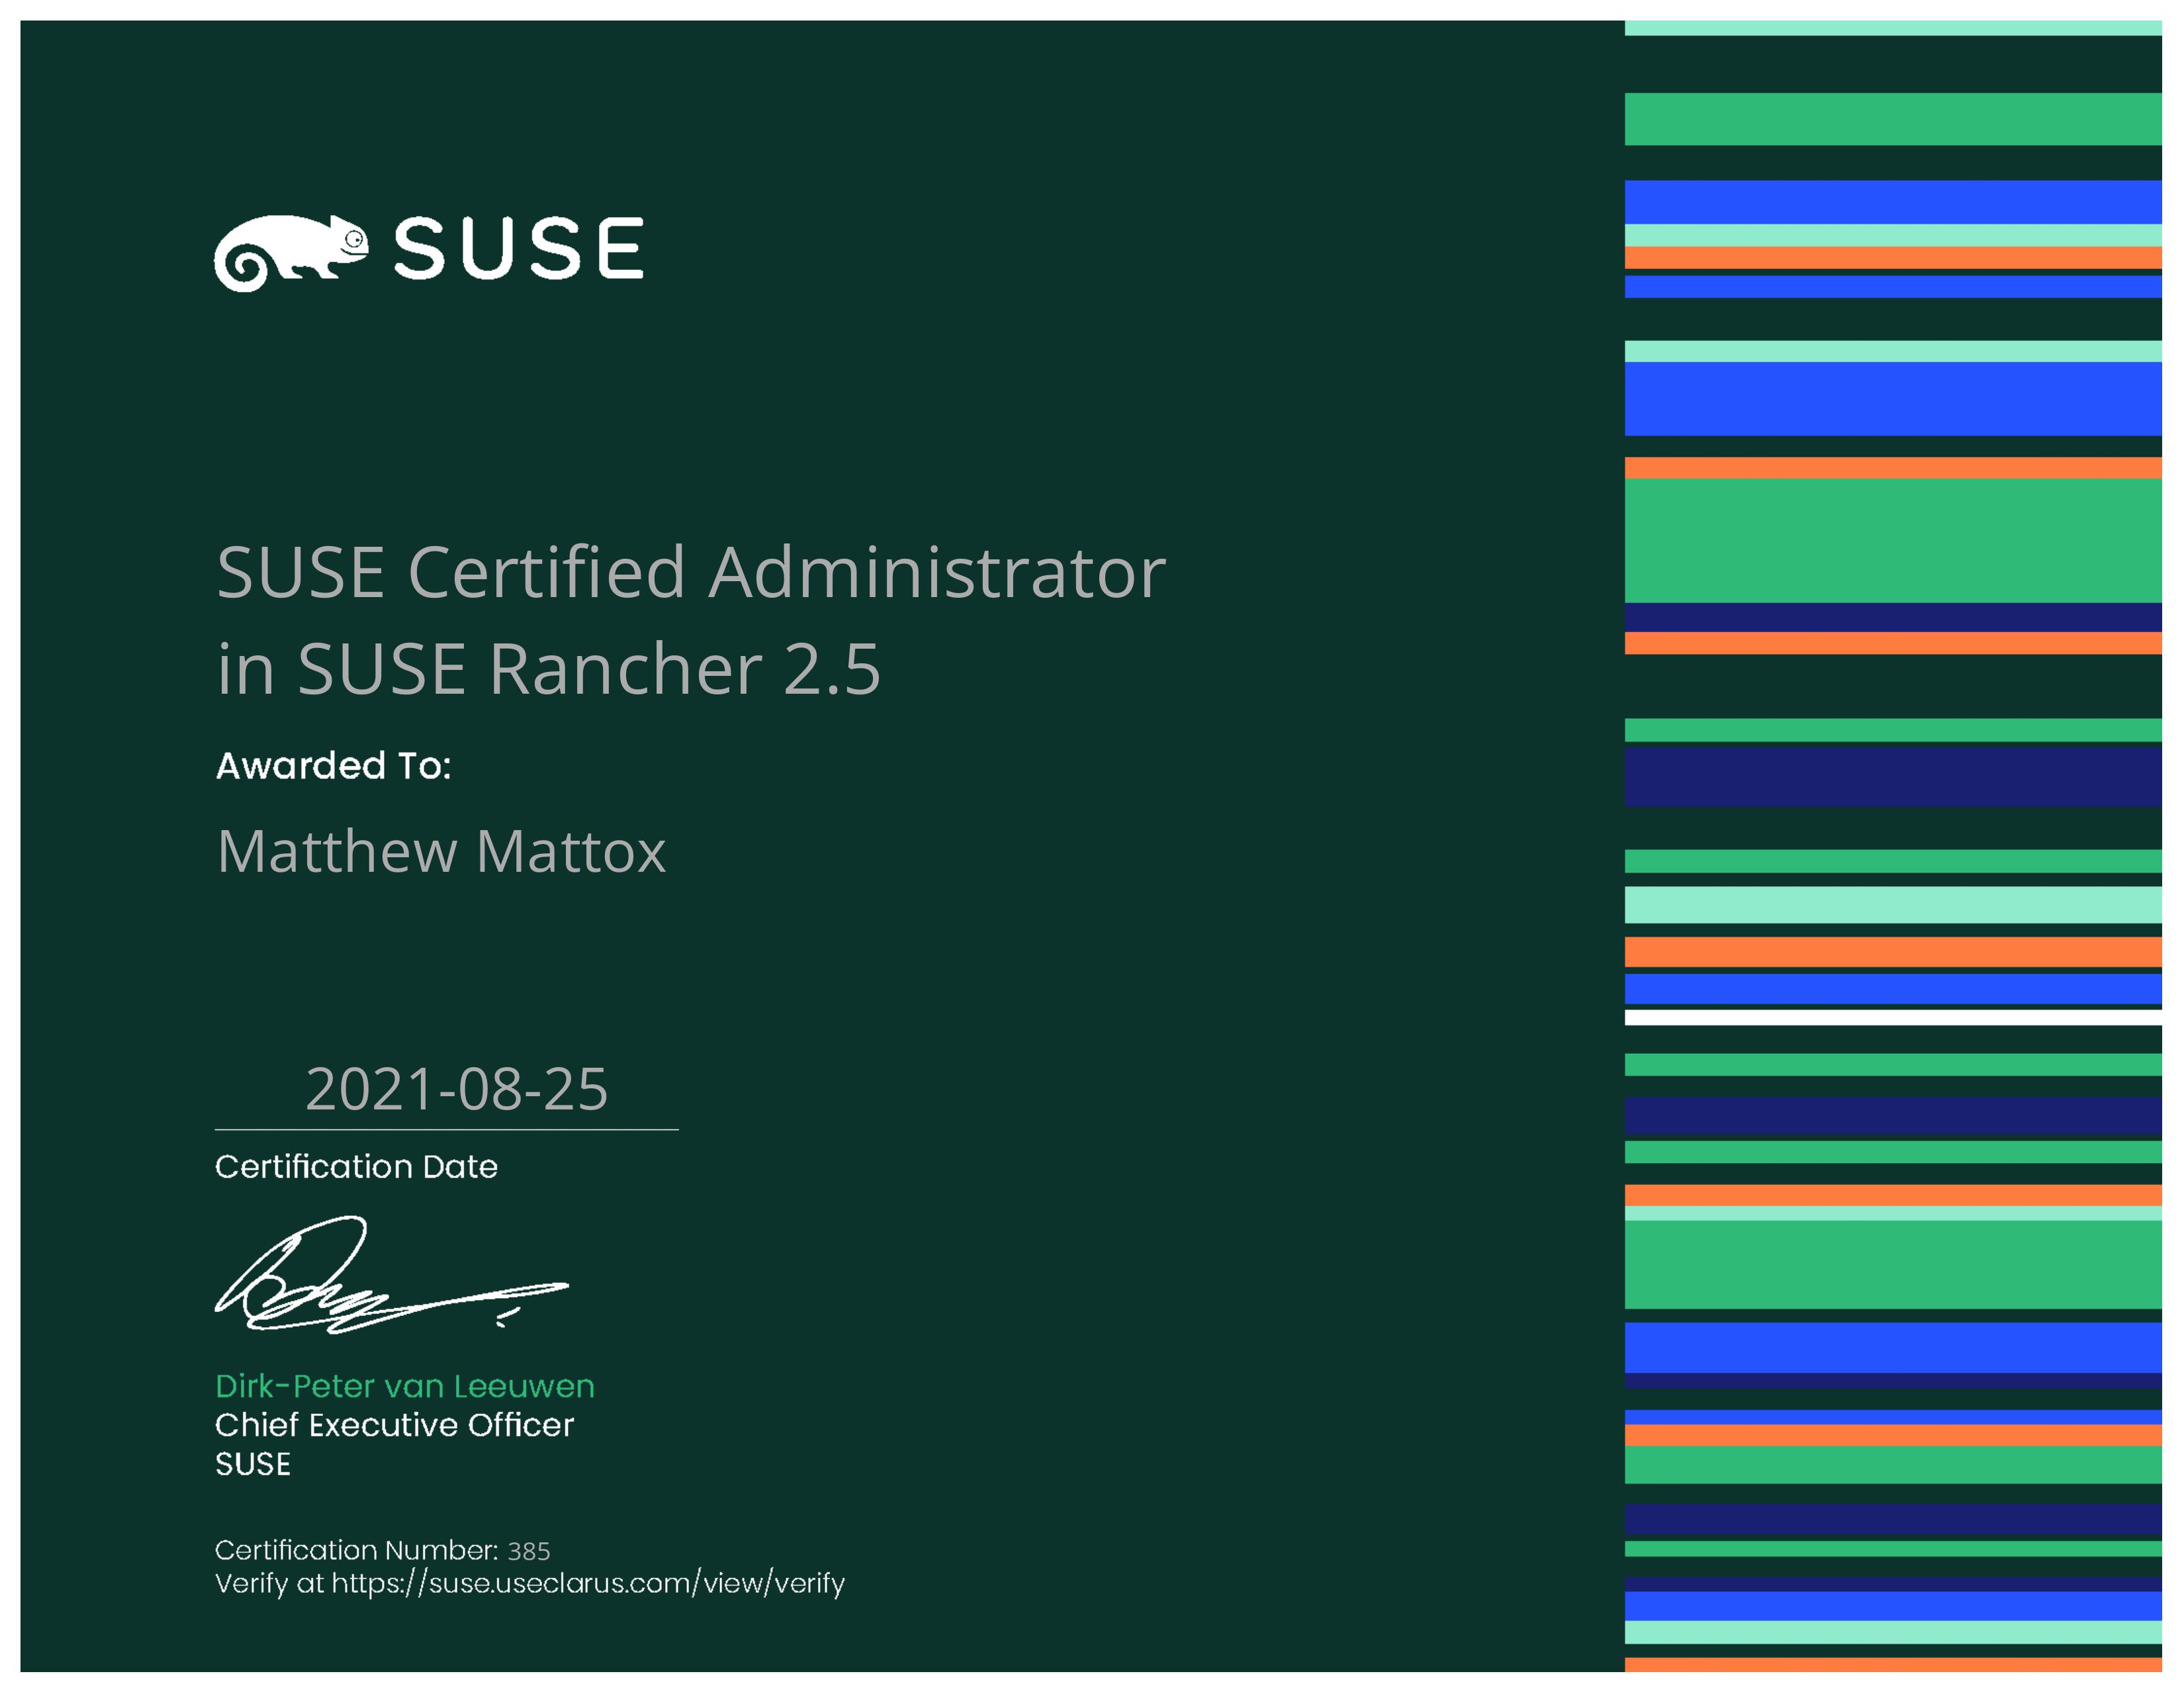 SUSE Certified Administrator in SUSE Rancher 2.5